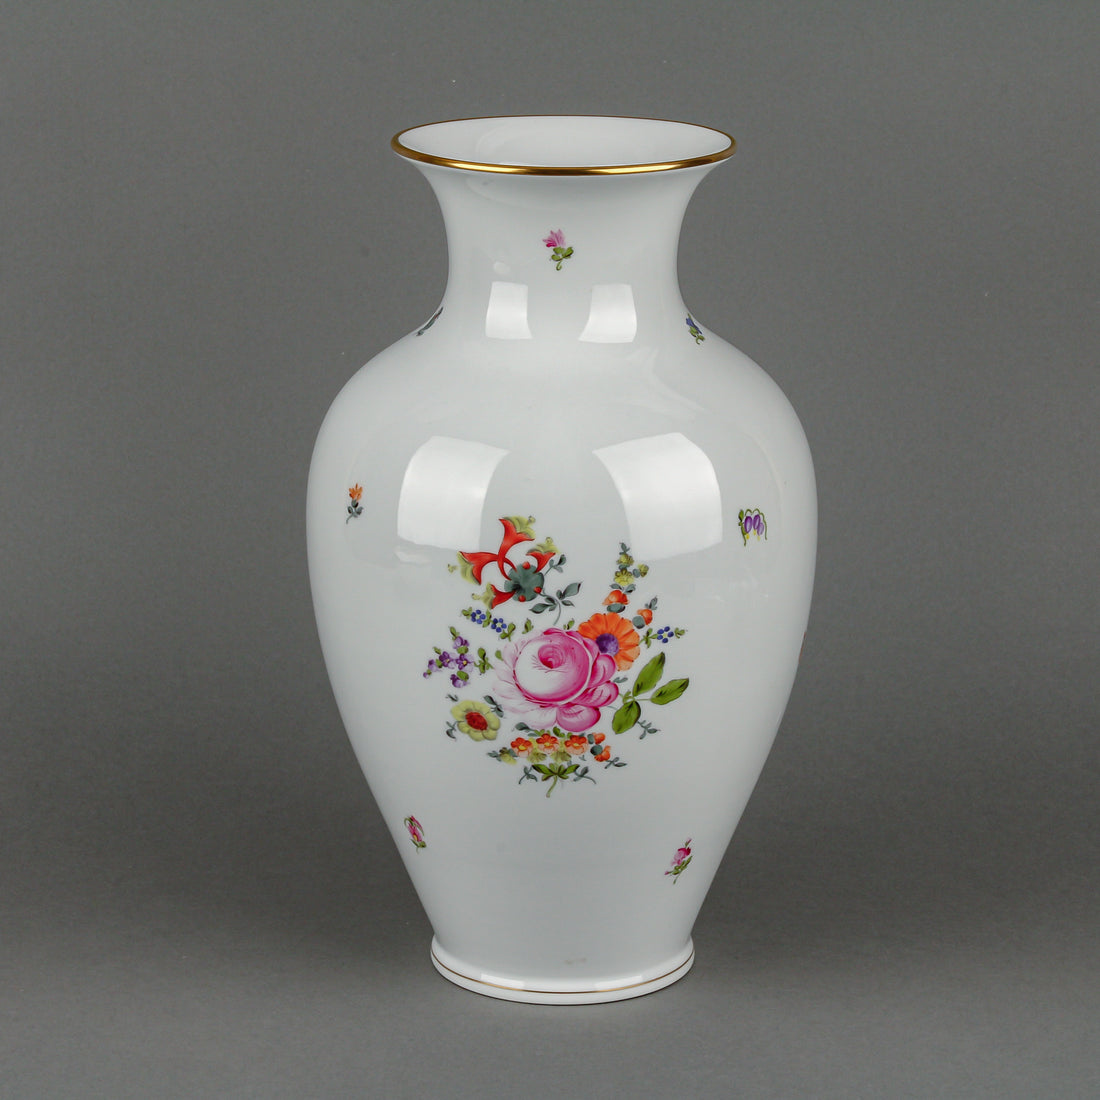 HEREND Printemps Hand-Painted Floral Vase 7001